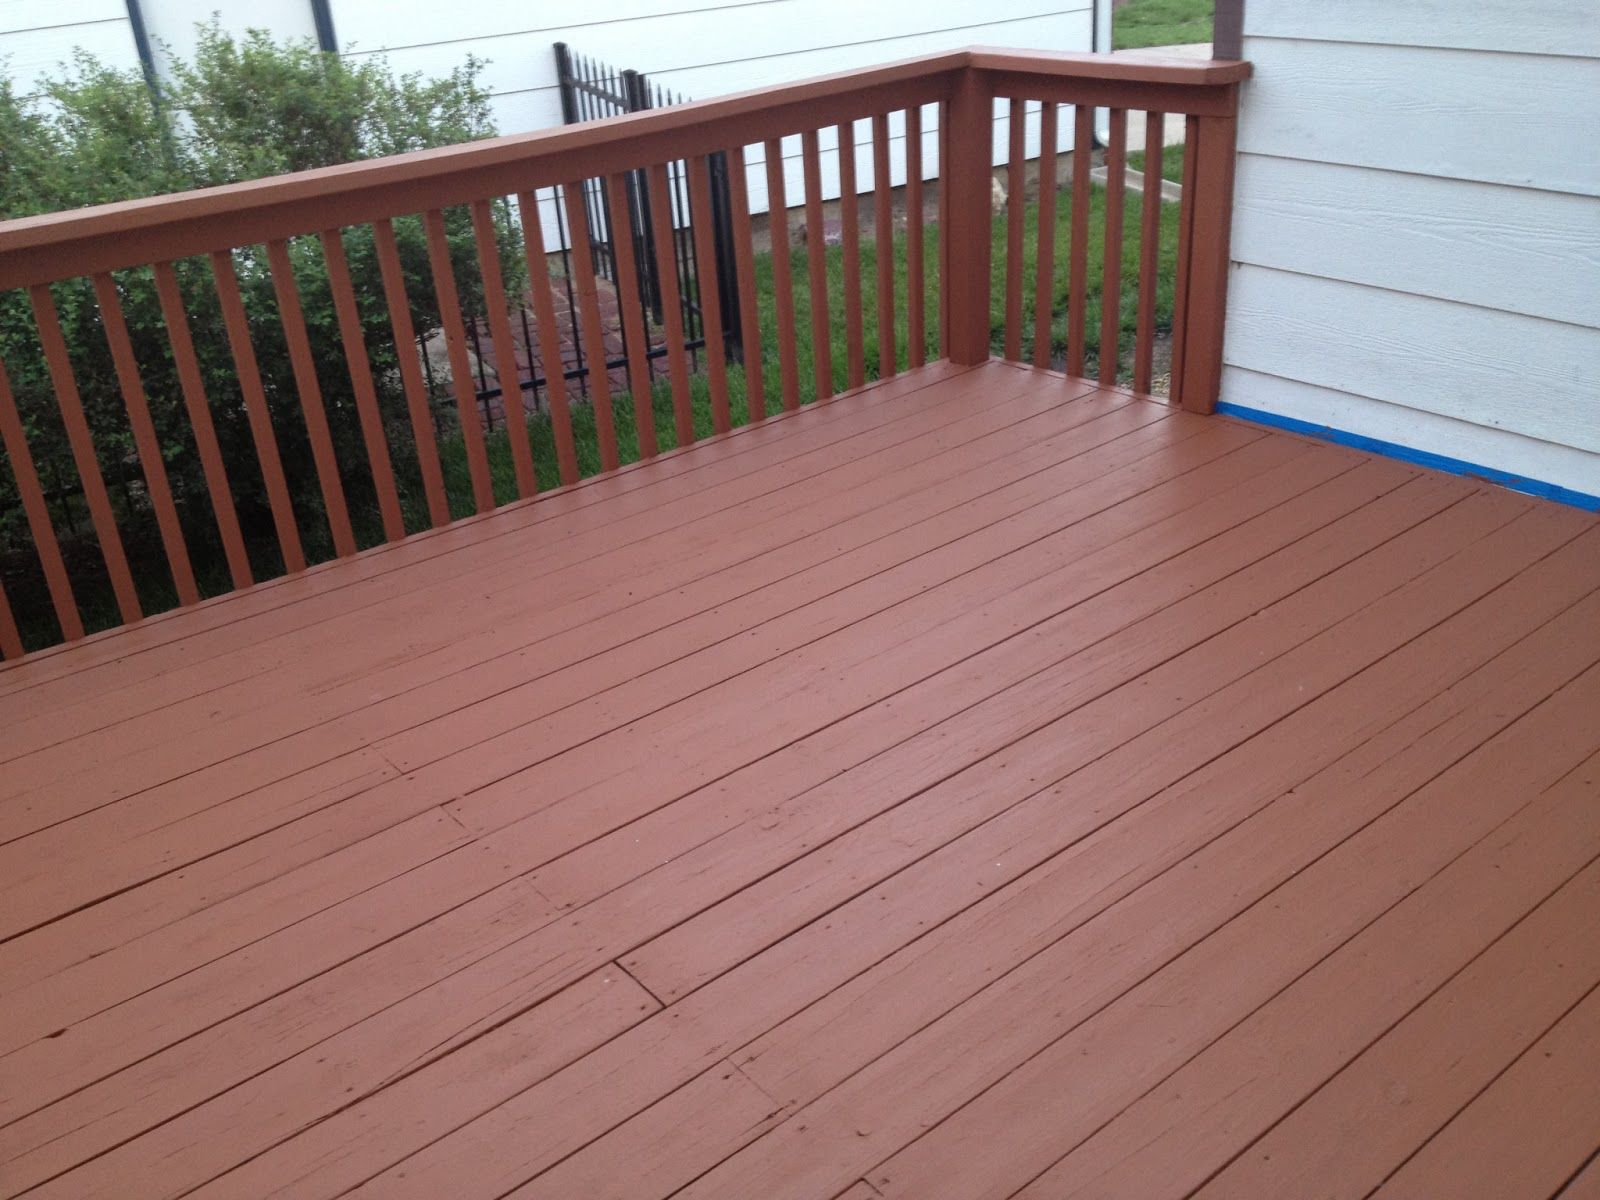 Behr Deckover Cappuccino Solid Color Behr Weatherproof Wood Stain throughout sizing 1600 X 1200